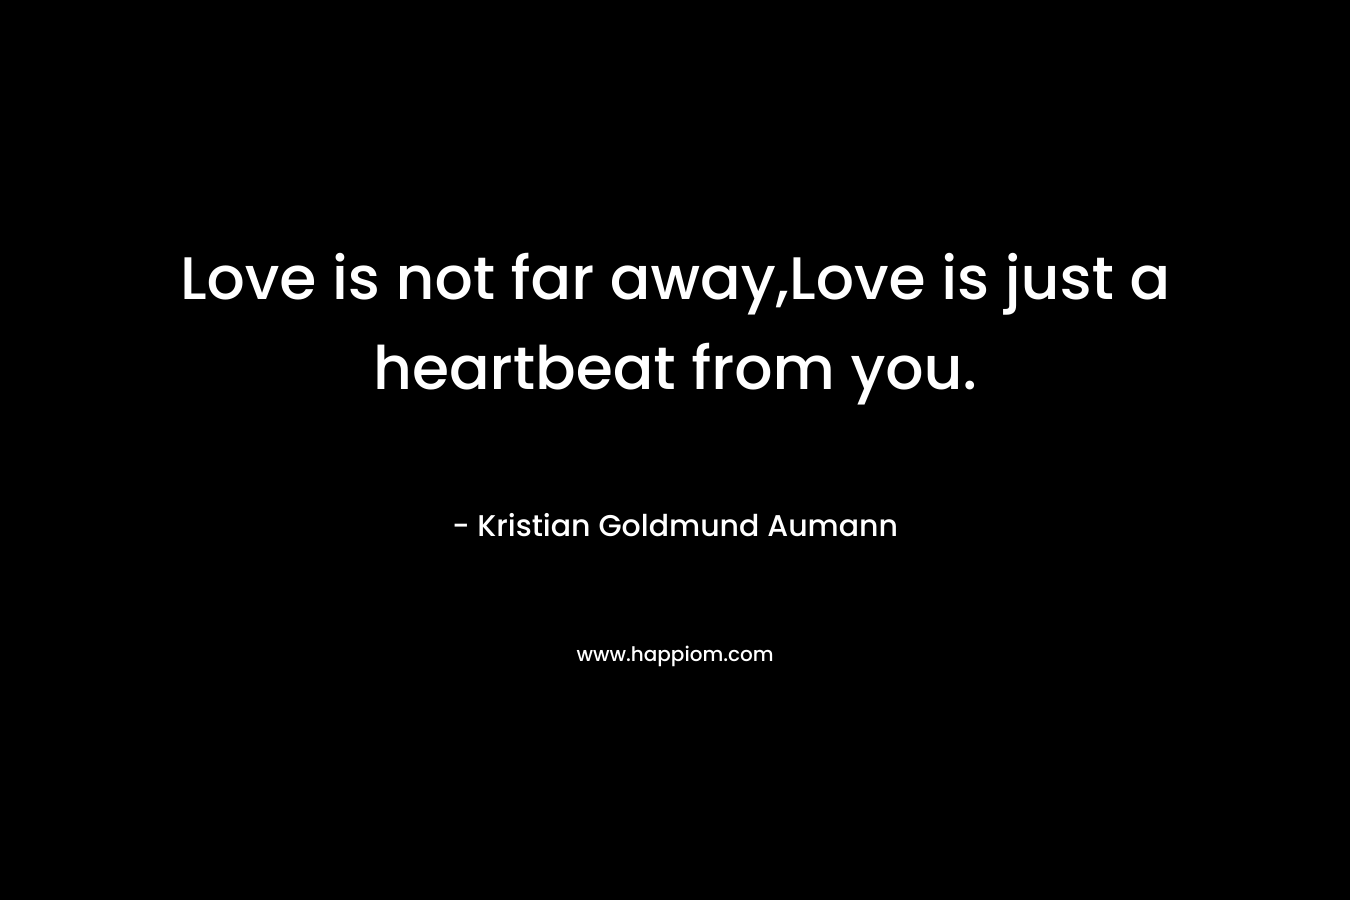 Love is not far away,Love is just a heartbeat from you.